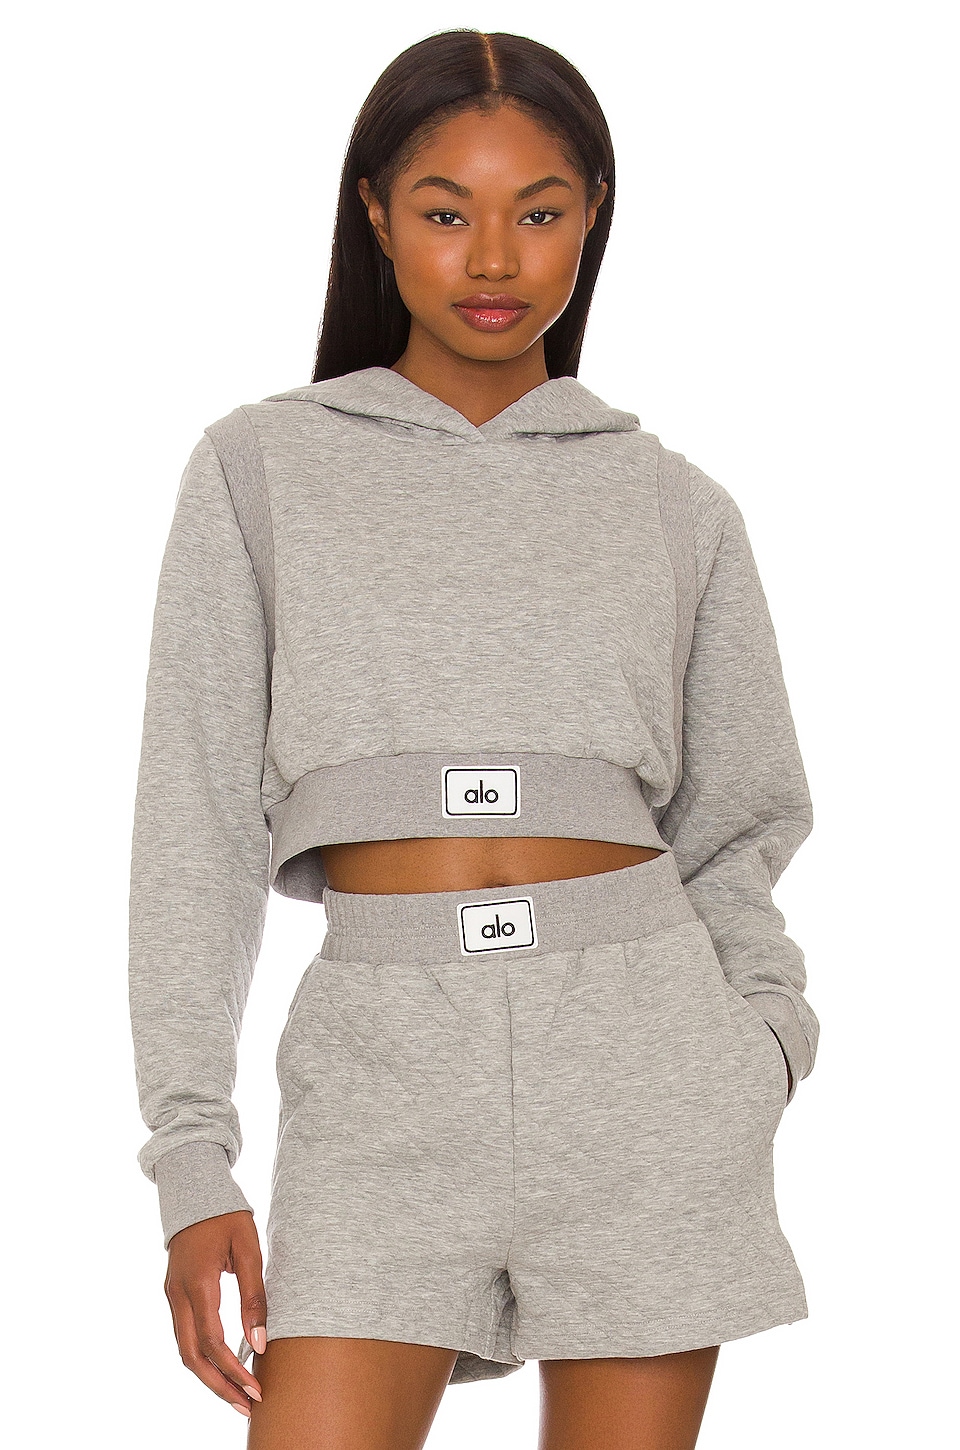 Muse cropped ribbed brushed-jersey hoodie